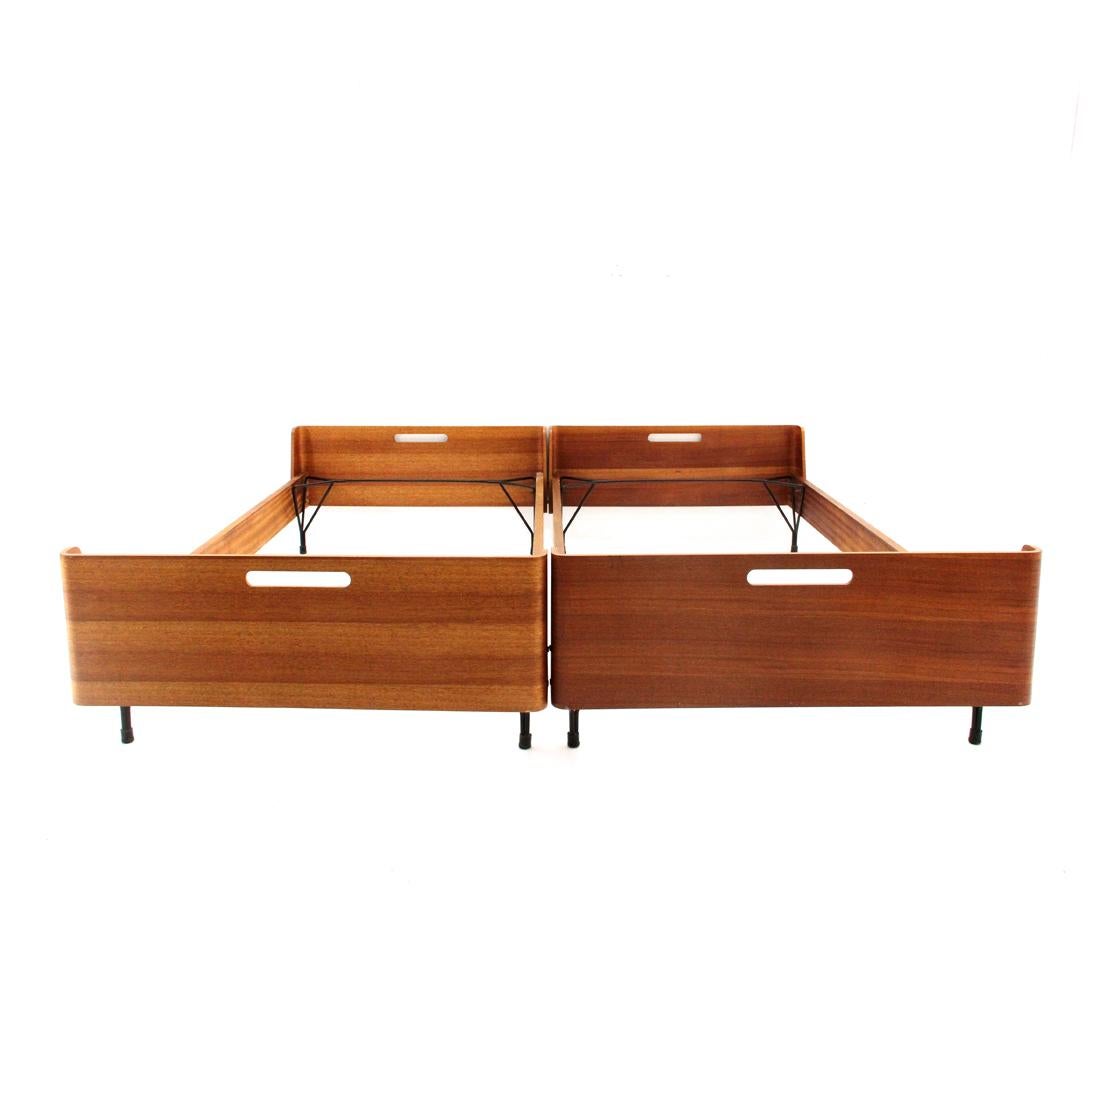 Pair of Midcentury Bed by Gastone Rinaldi for RIMA, 1950s (Metall)